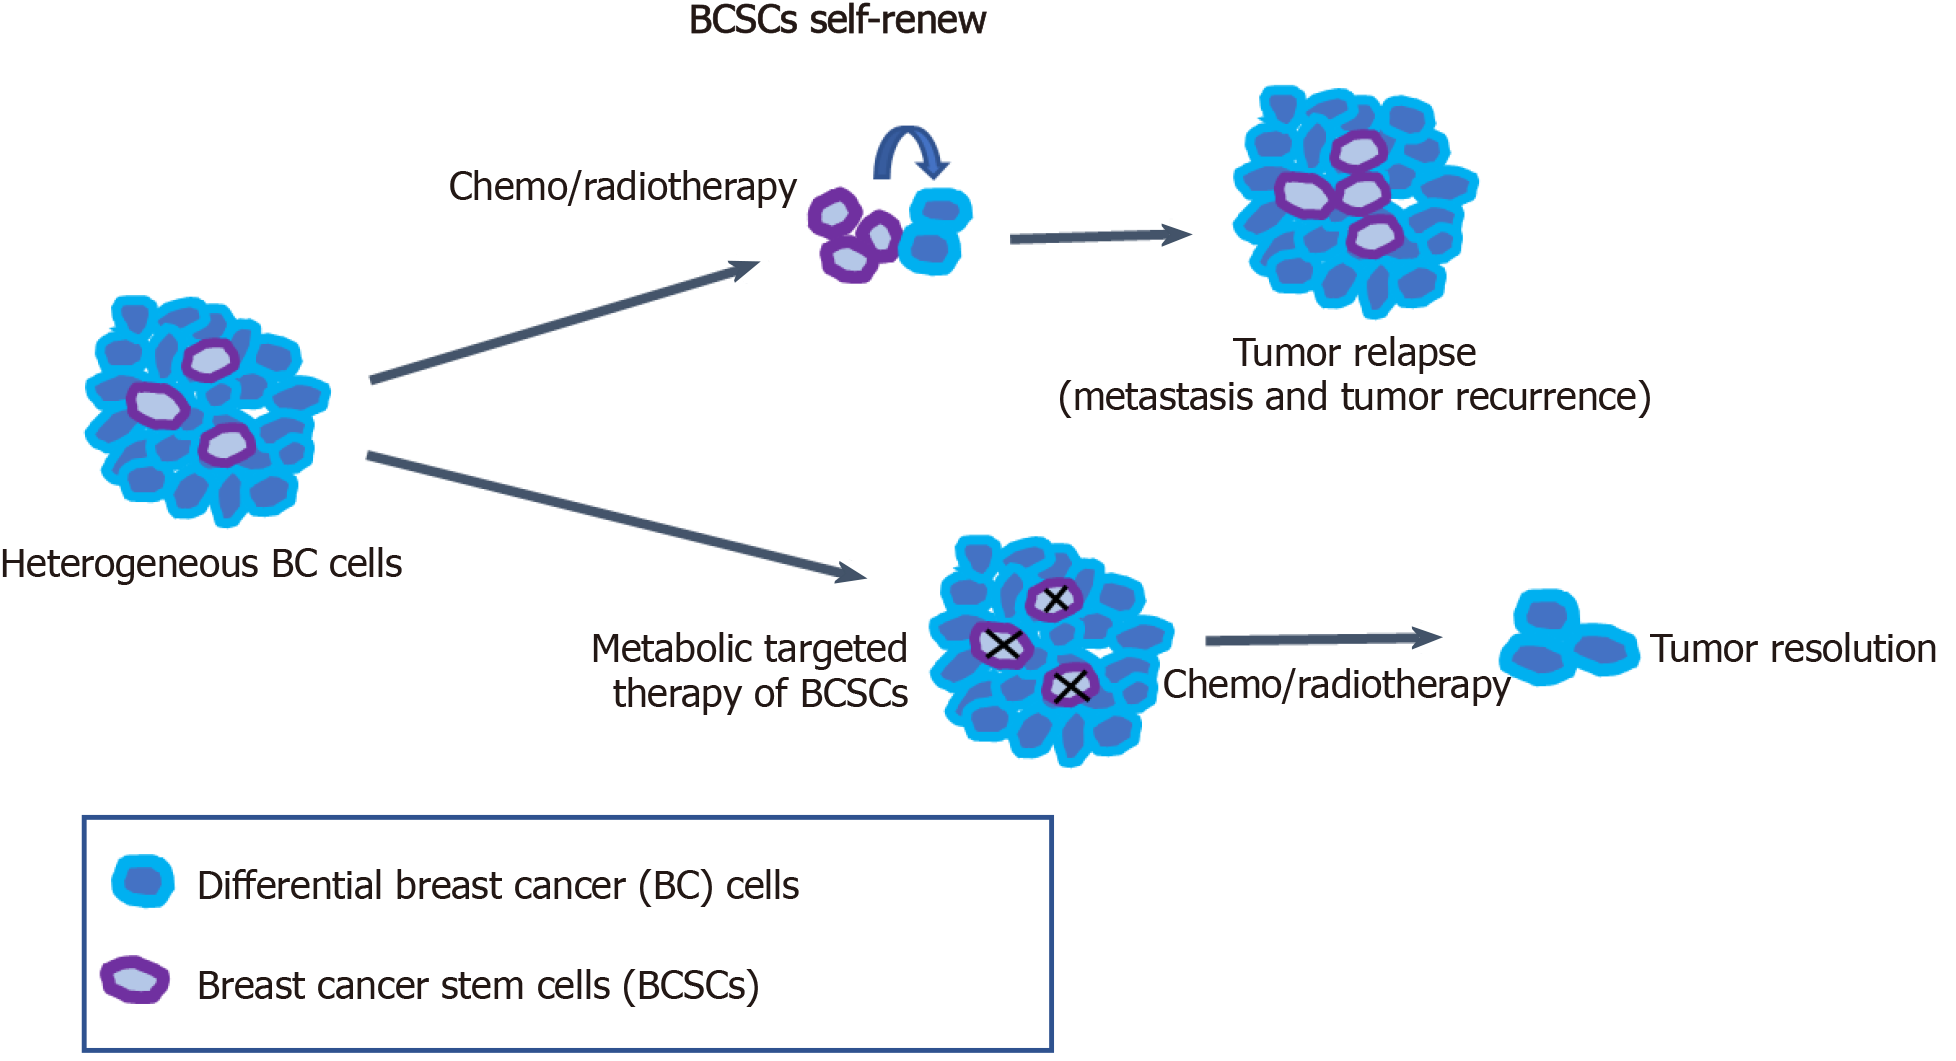 Advance In Metabolism And Target Therapy In Breast Cancer Stem Cells